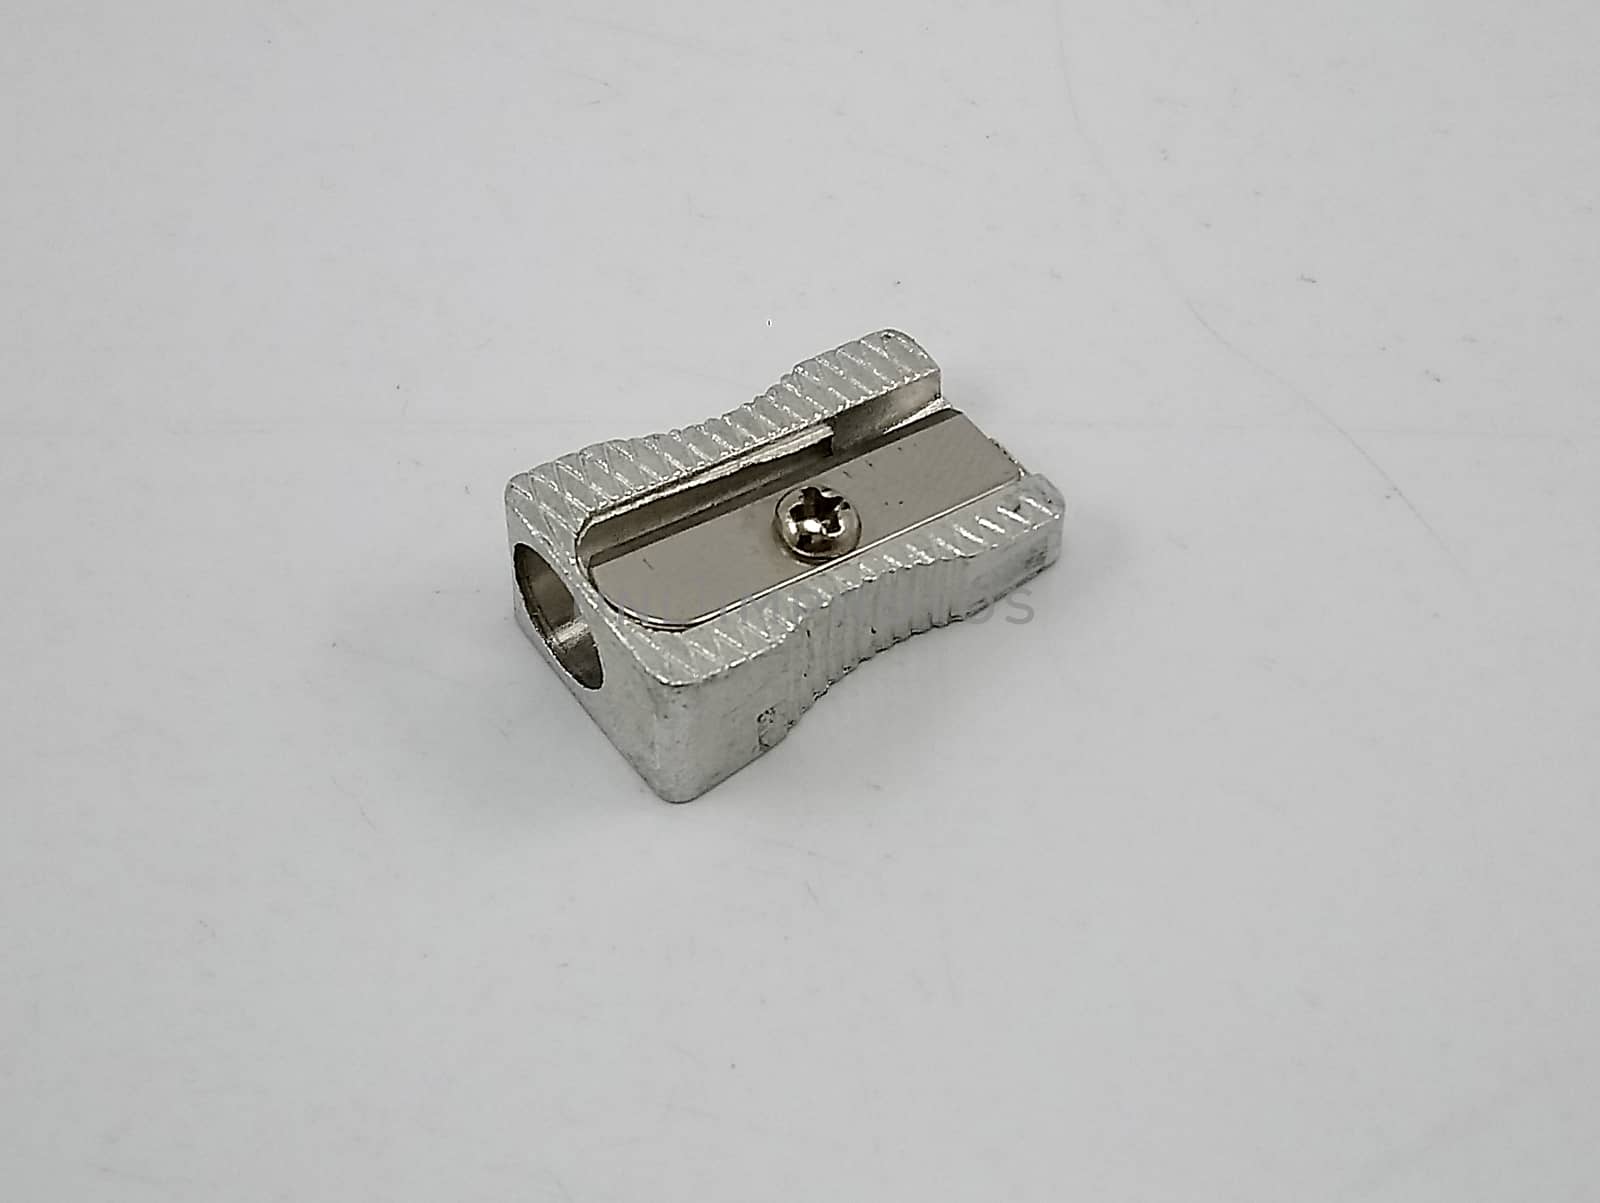 Wood pencil sharpener school supply silver color use to sharpen the tip of pencil